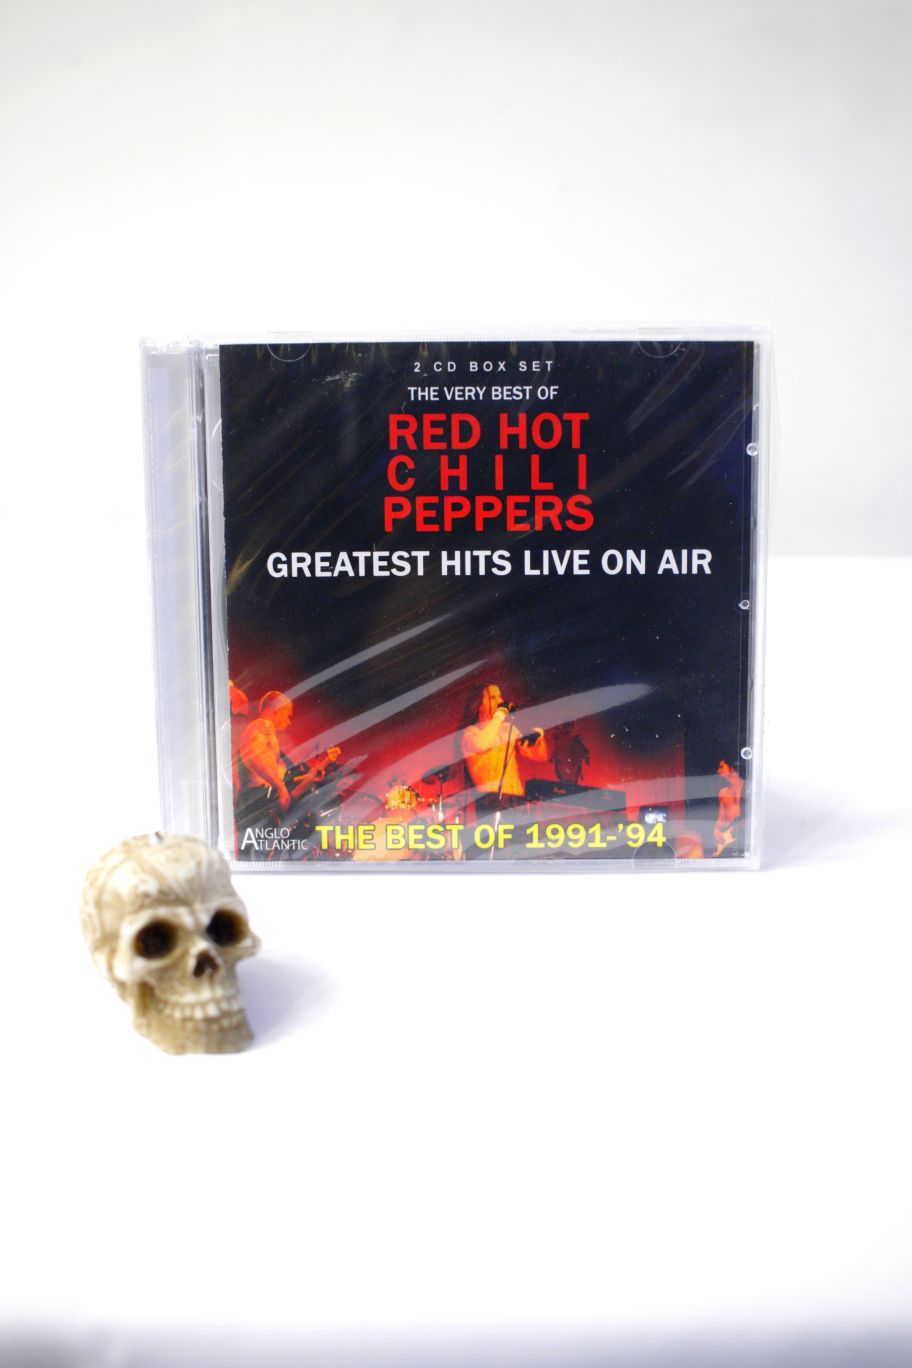 CD RED HOT CHILI PEPPERS GREATEST HITS LIVE ON AIR 1991-94